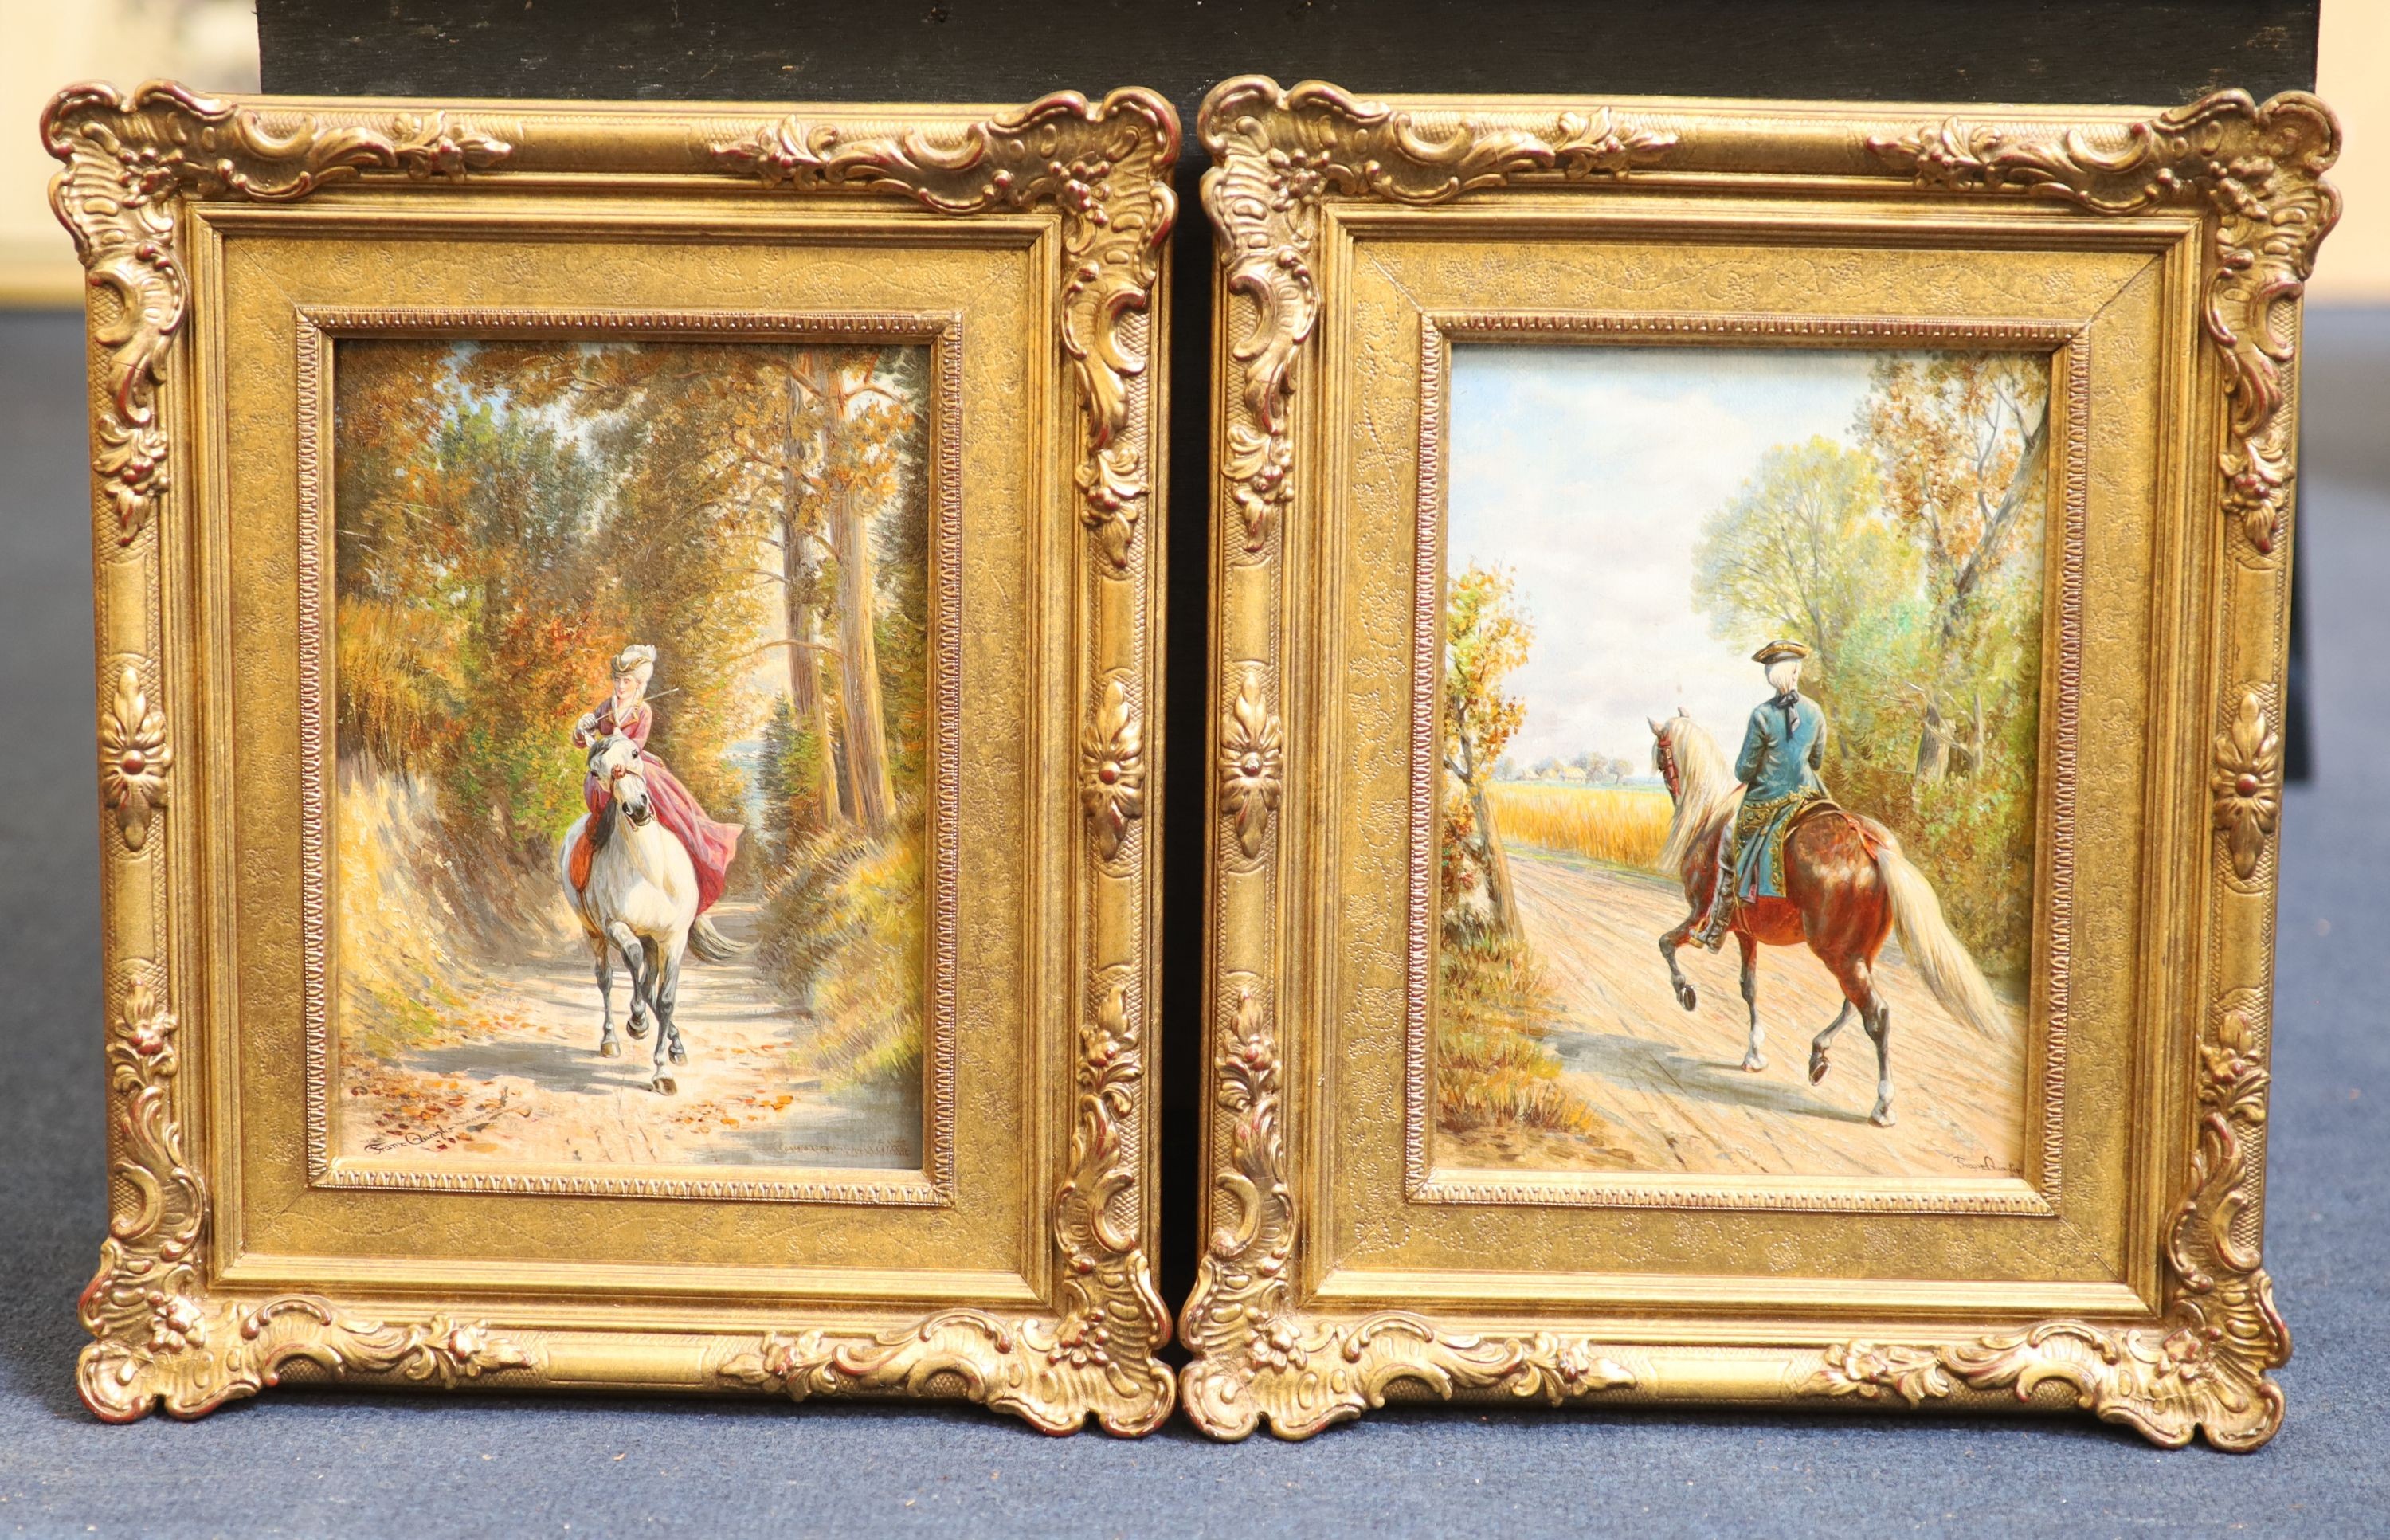 Franz Quaglio (German, 1844-1920), Equestrians on country lanes, Pair of oils on wooden panels, 21 x 15cm.